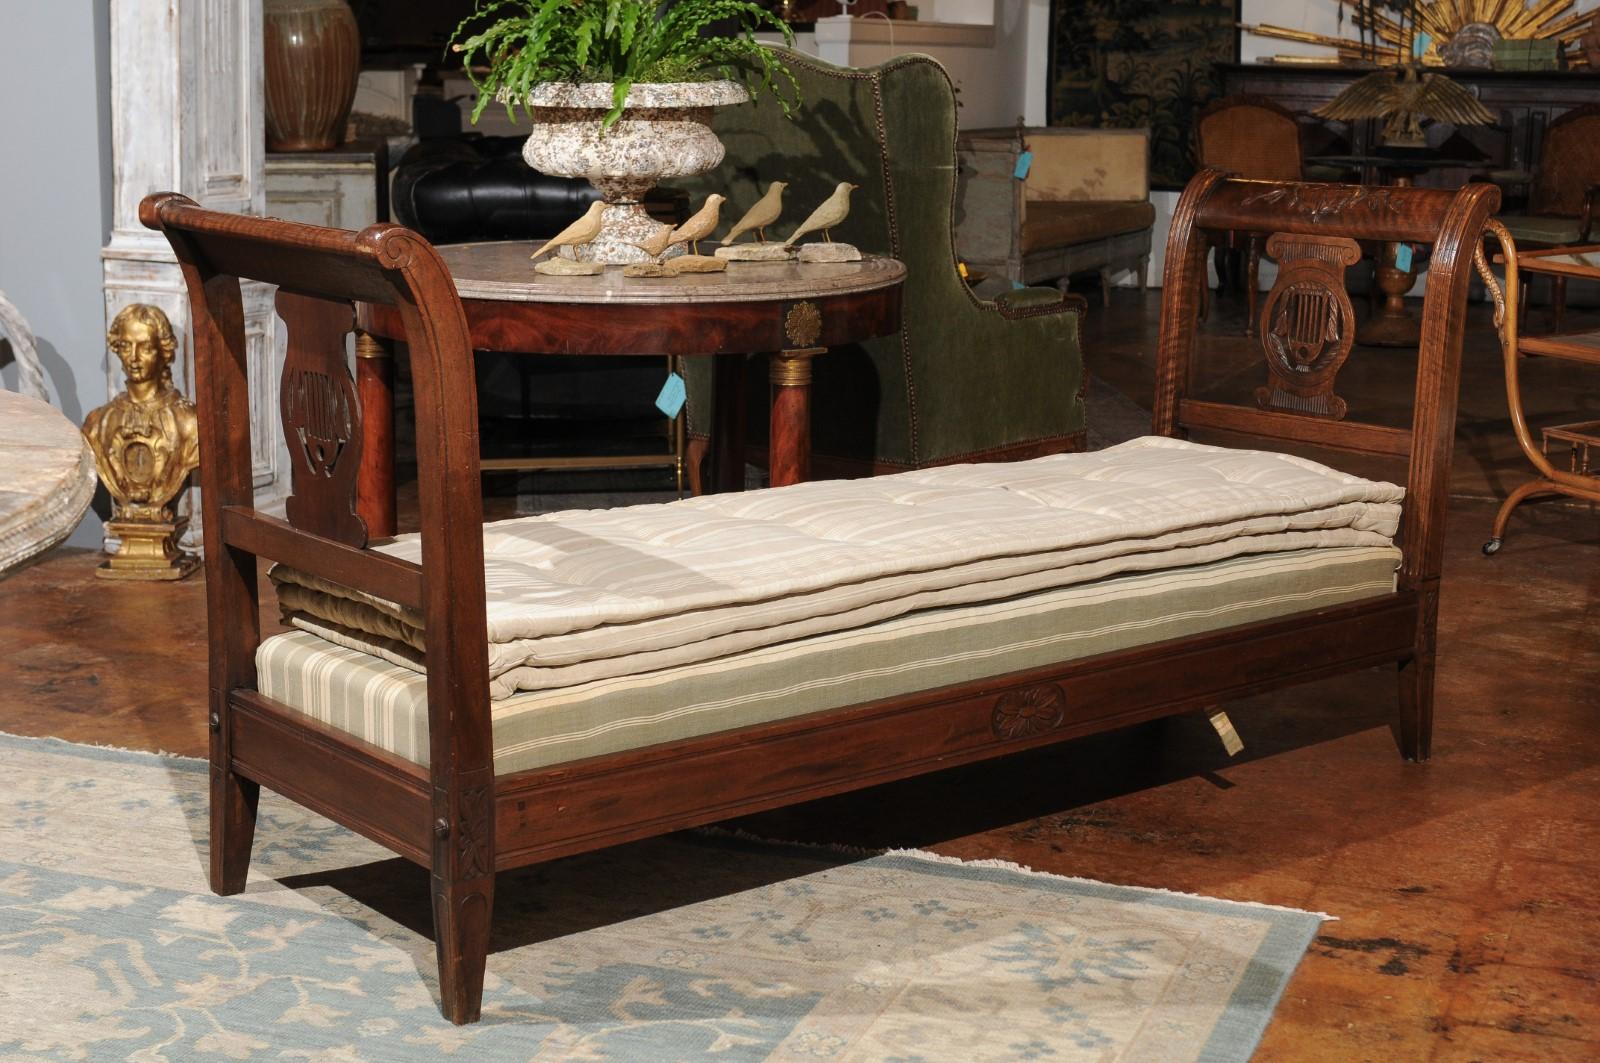 A French Directoire style walnut daybed from the 19th century, with carved lyre and urn motifs. This exquisite French Directoire style daybed features an un-upholstered rectangular seat with cushion, flanked by two elegant out-scrolling arms. Each